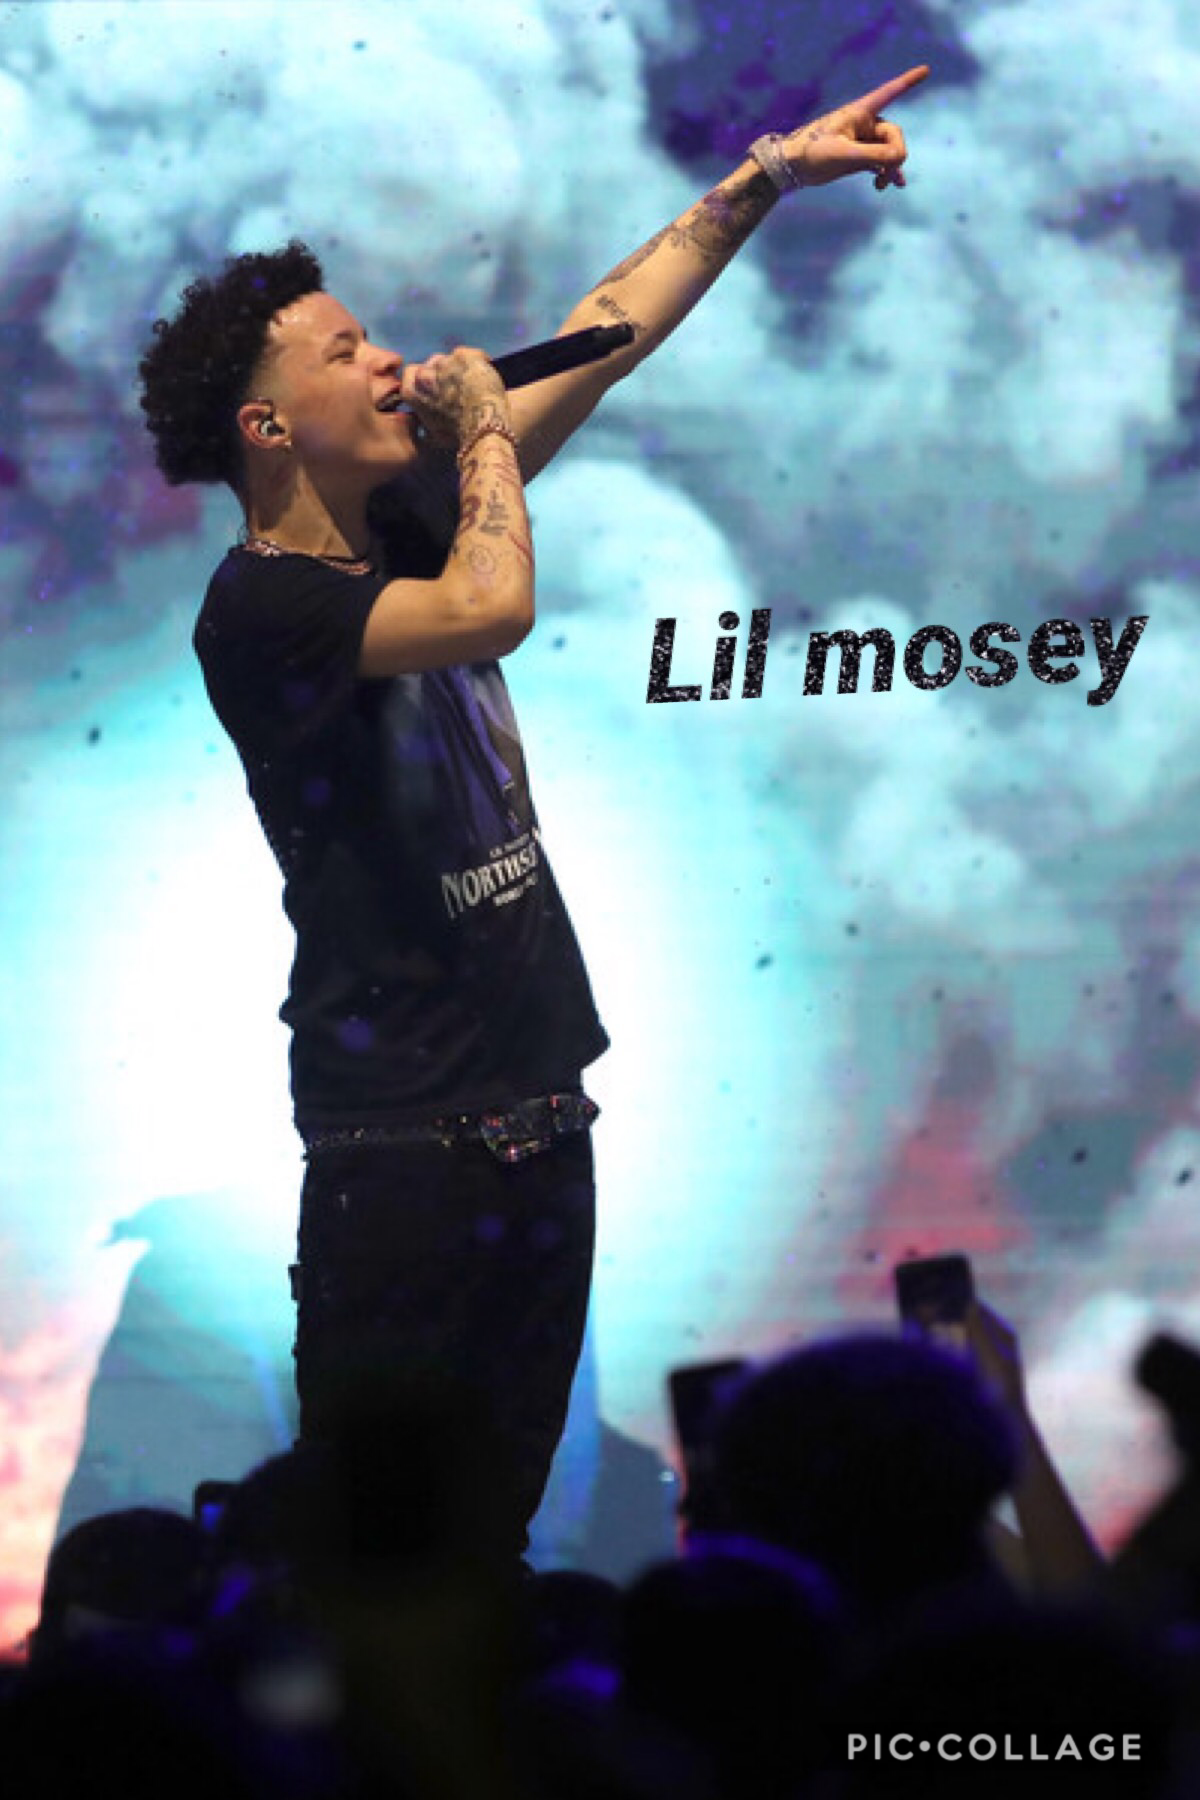 Lil mosey 